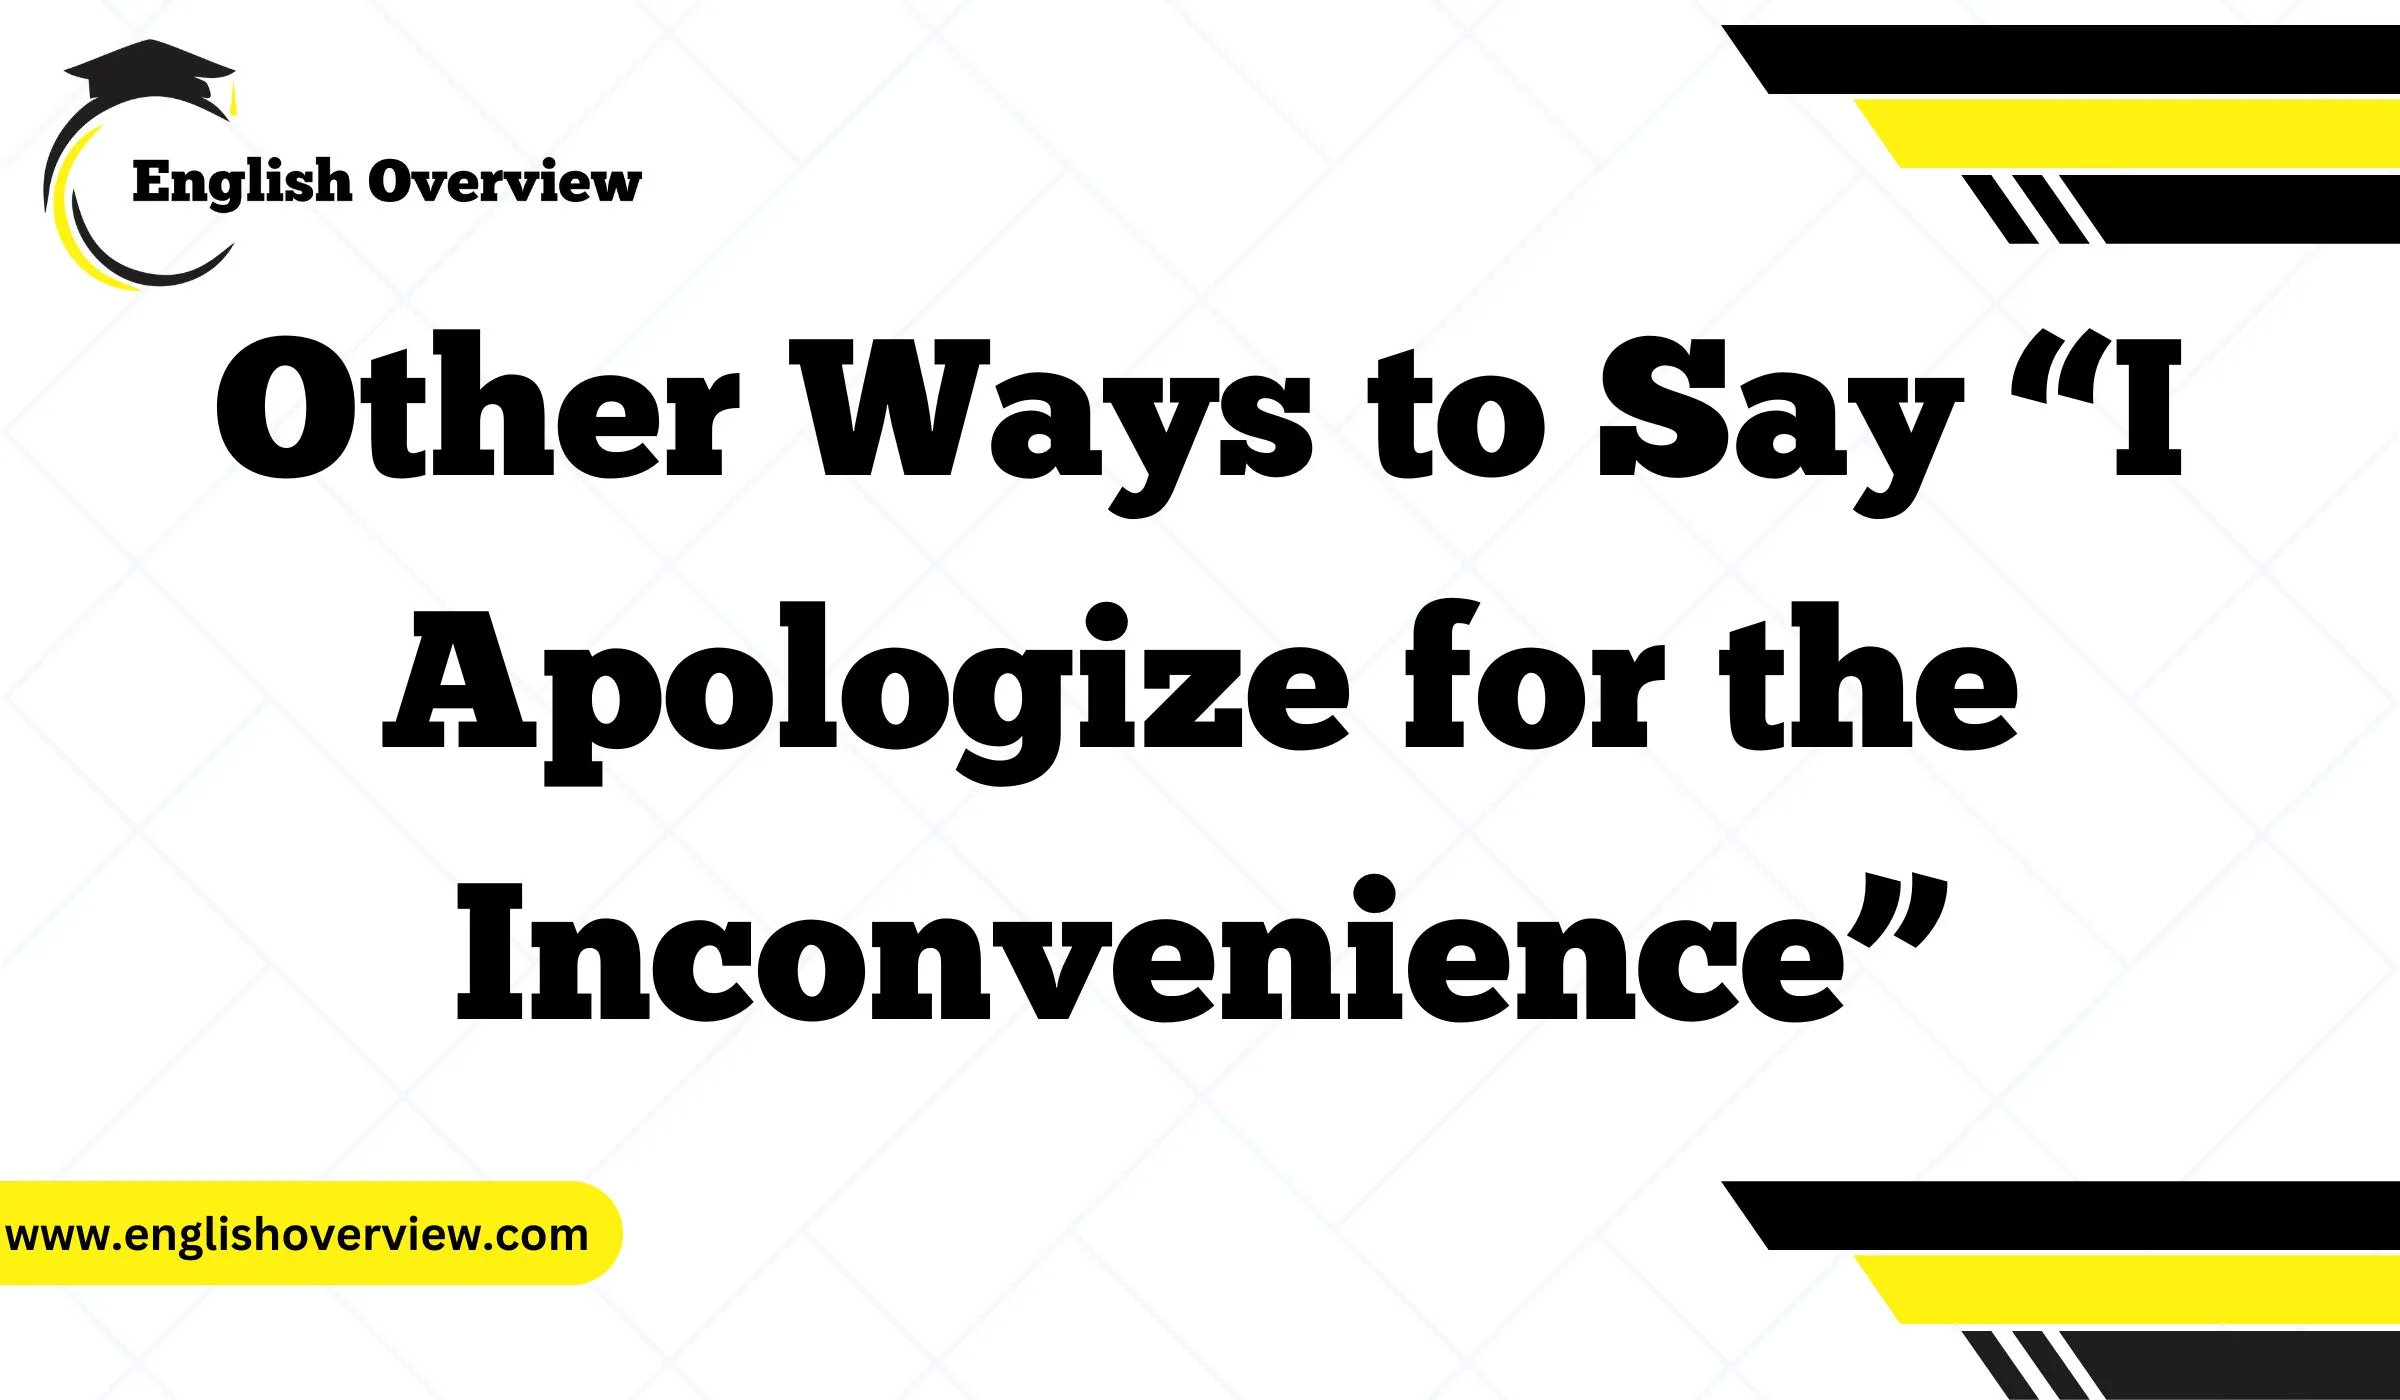 Other Ways to Say “I Apologize for the Inconvenience”